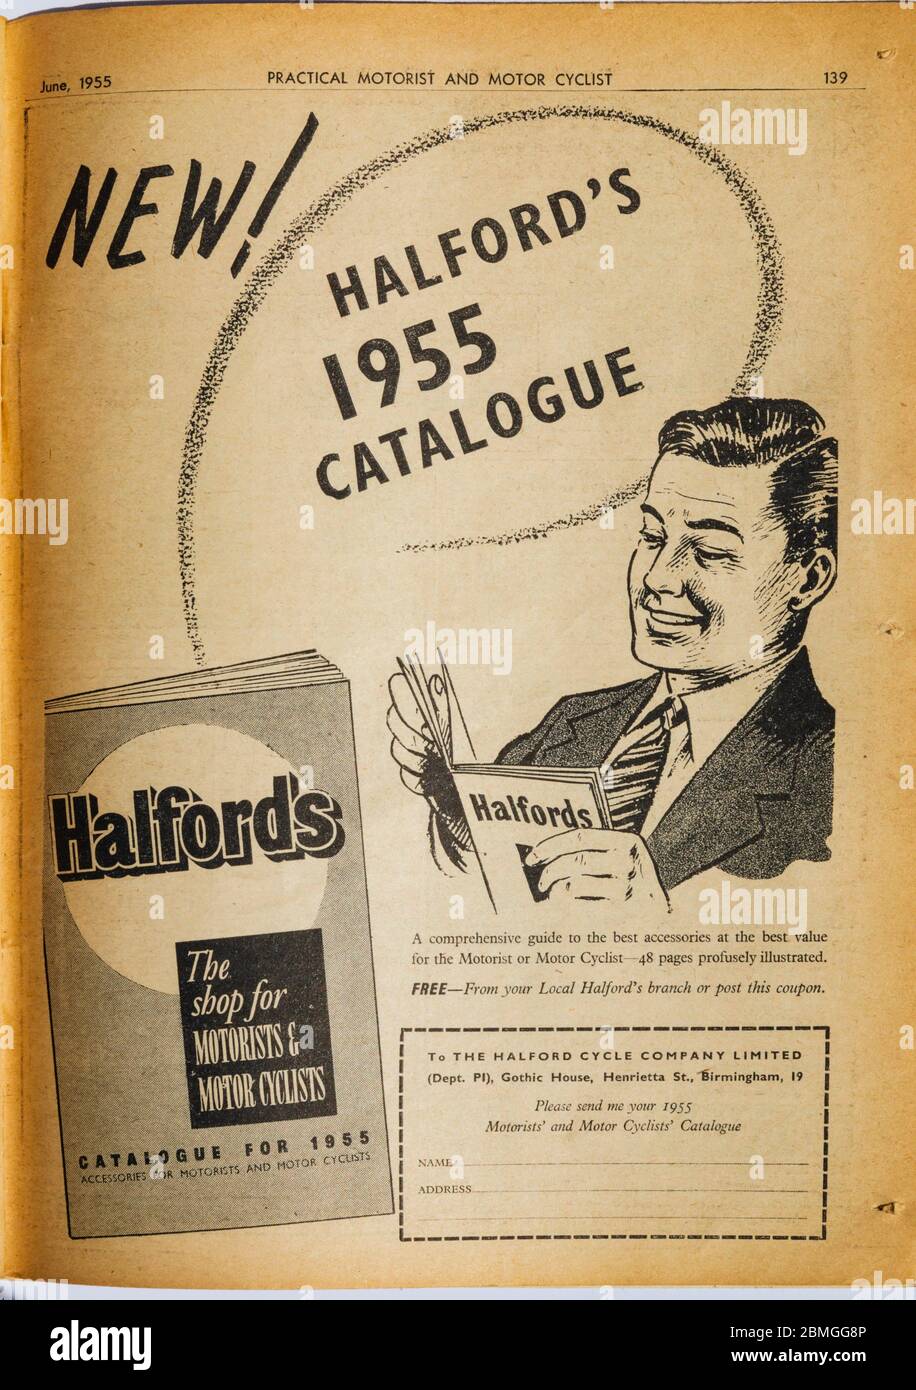 Black and white advert for Halfords Catalogue in the June 1955 issue of Practical Motorist and Motor Cyclist magazine Stock Photo